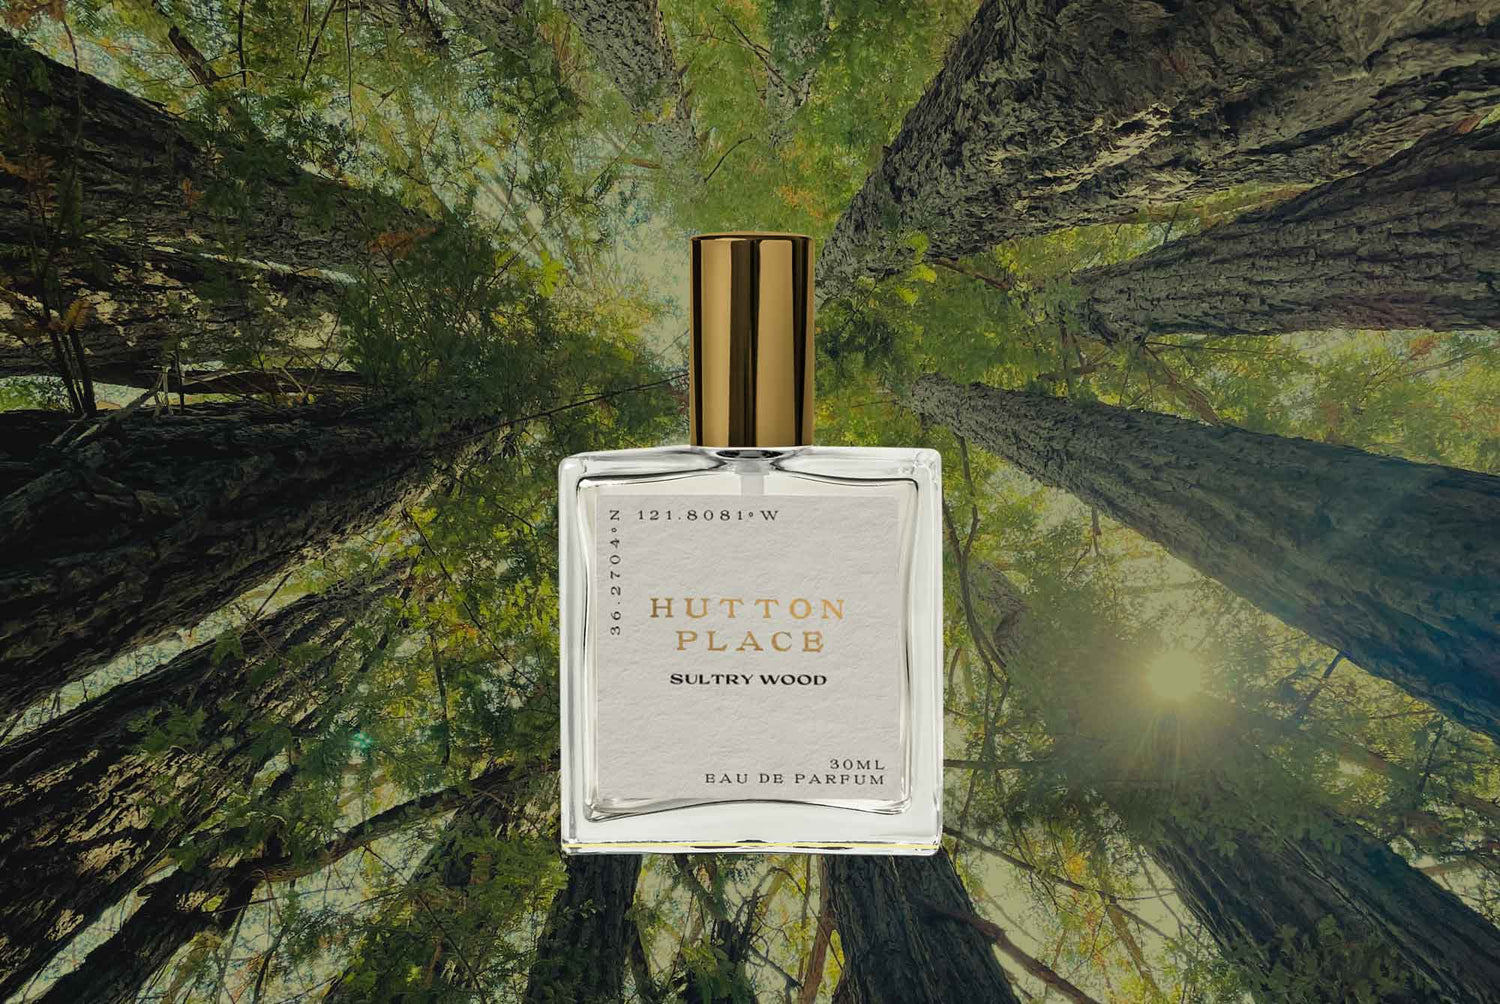 Sultry Wood perfume by Hutton Place